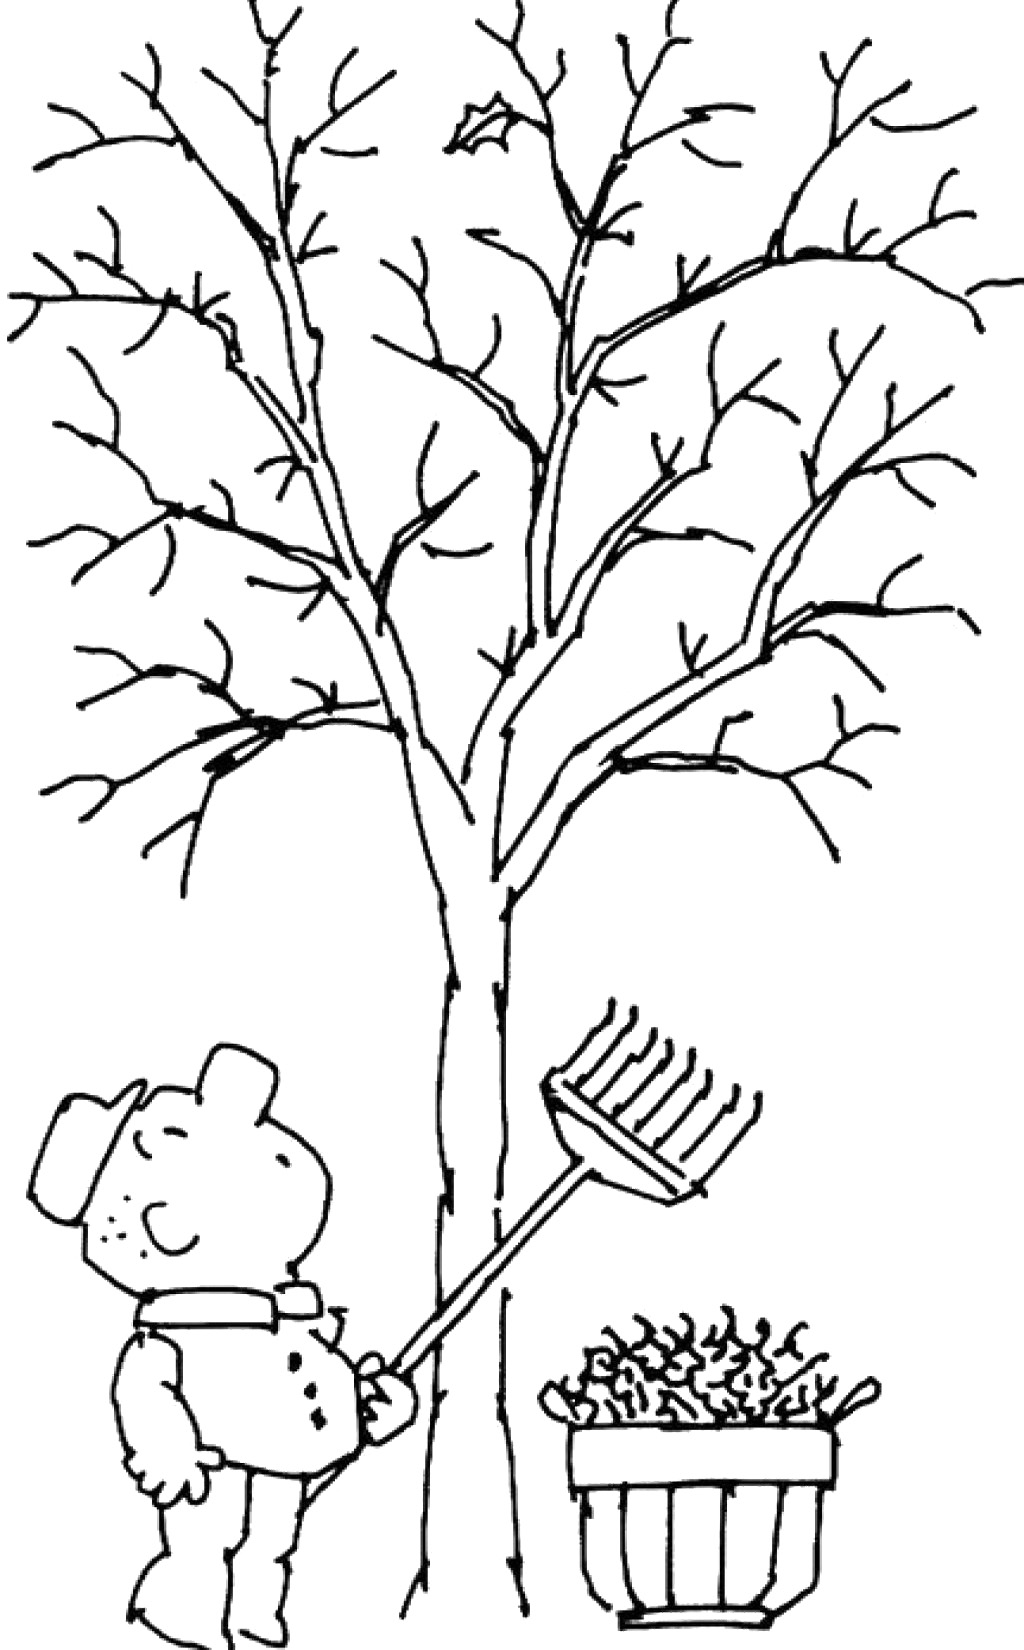 Tree without leaves coloring page to print and download for kids for kids